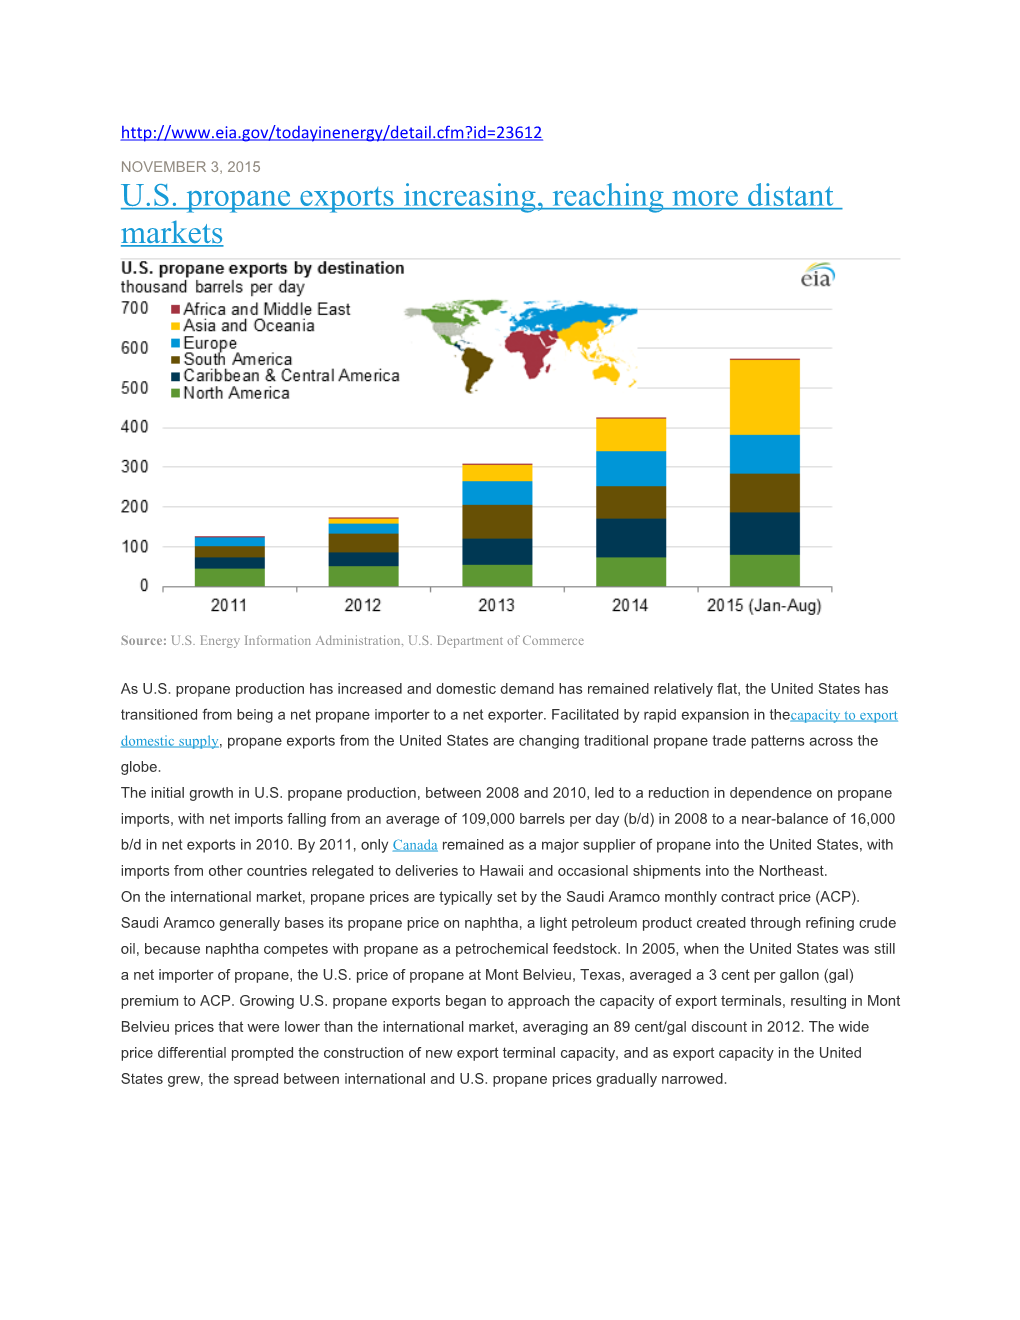 U.S. Propane Exports Increasing, Reaching More Distant Markets